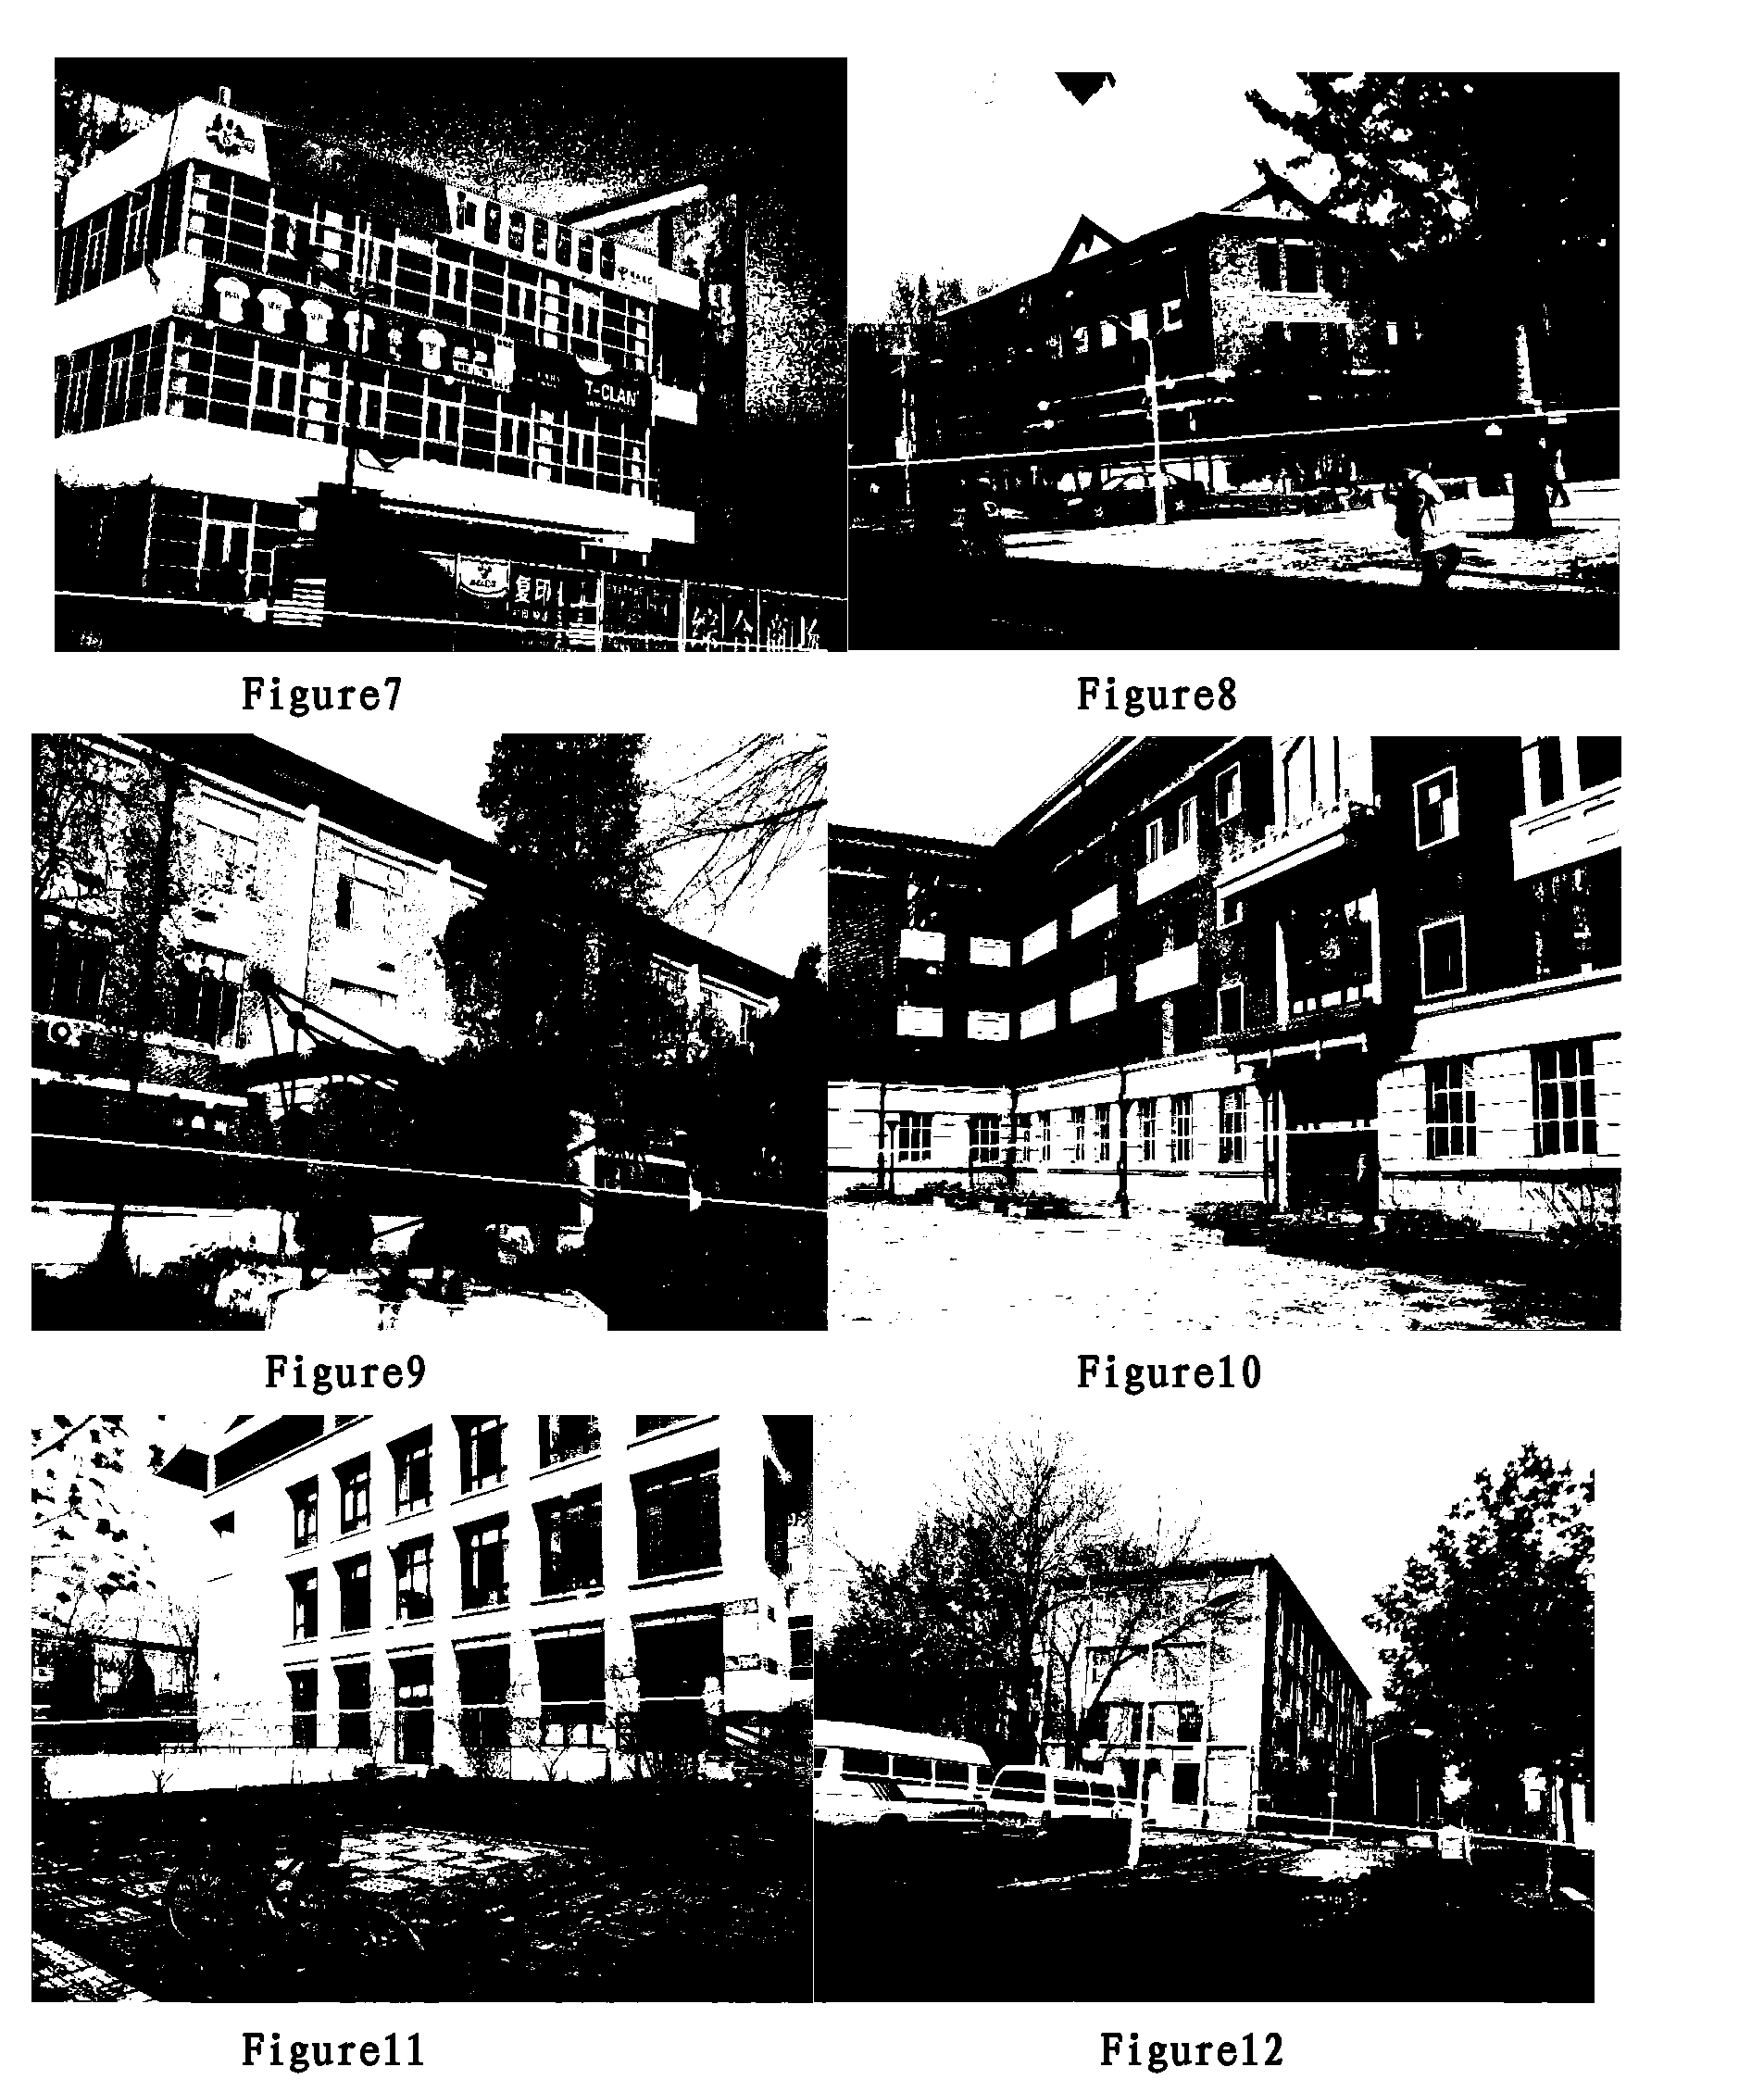 Method for shooting and taking evidence through handheld camera